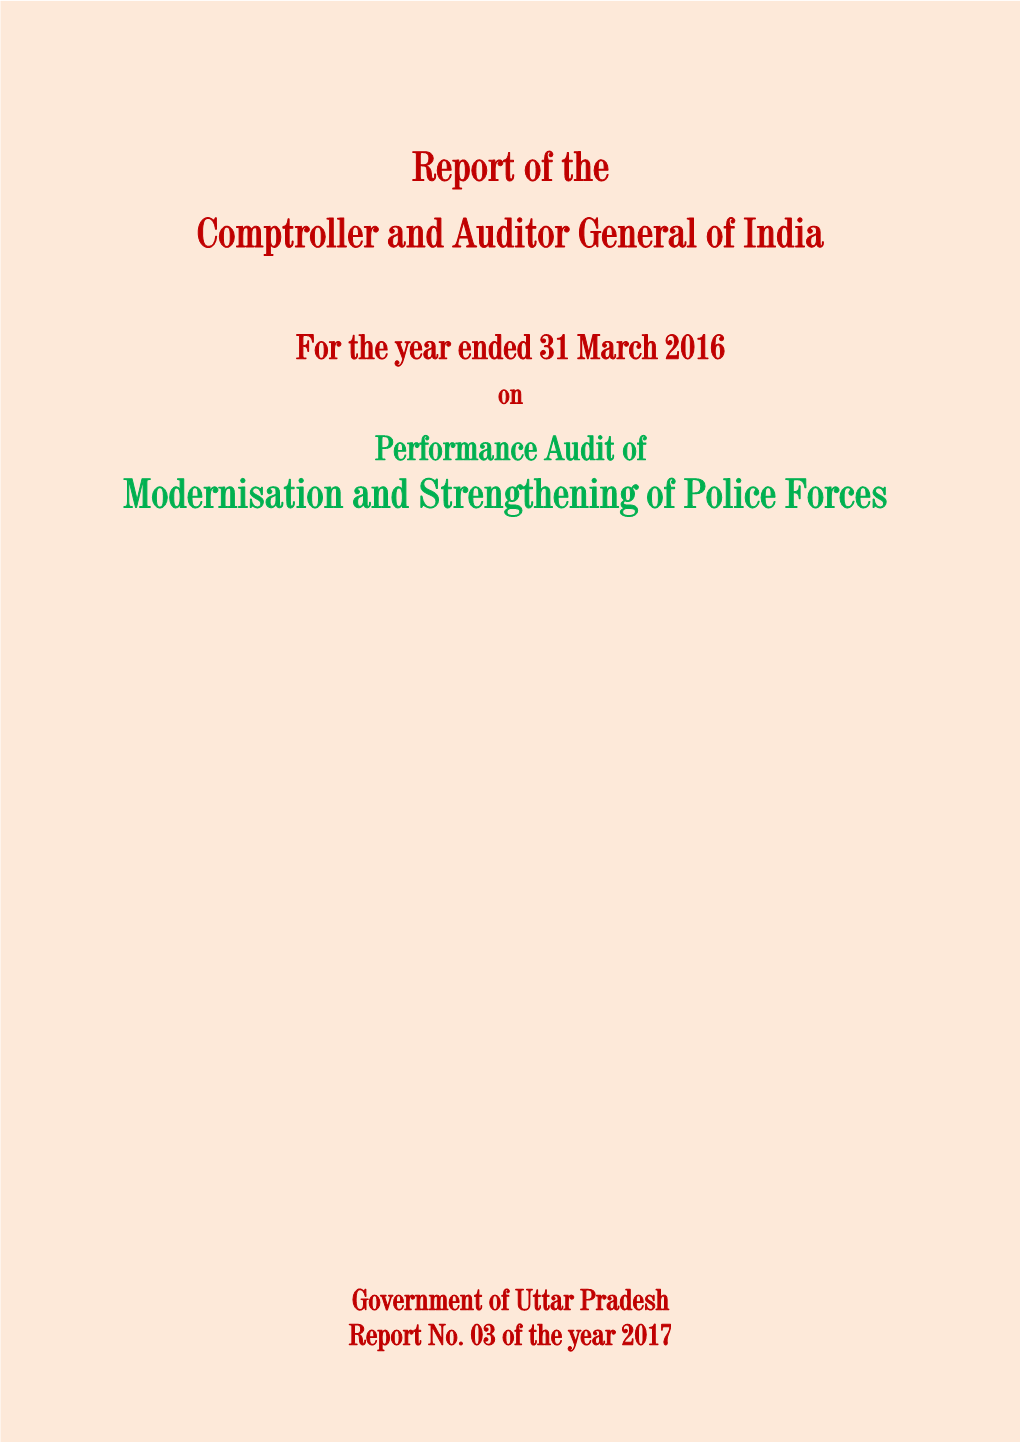 Report of the Comptroller and Auditor General of India Modernisation And